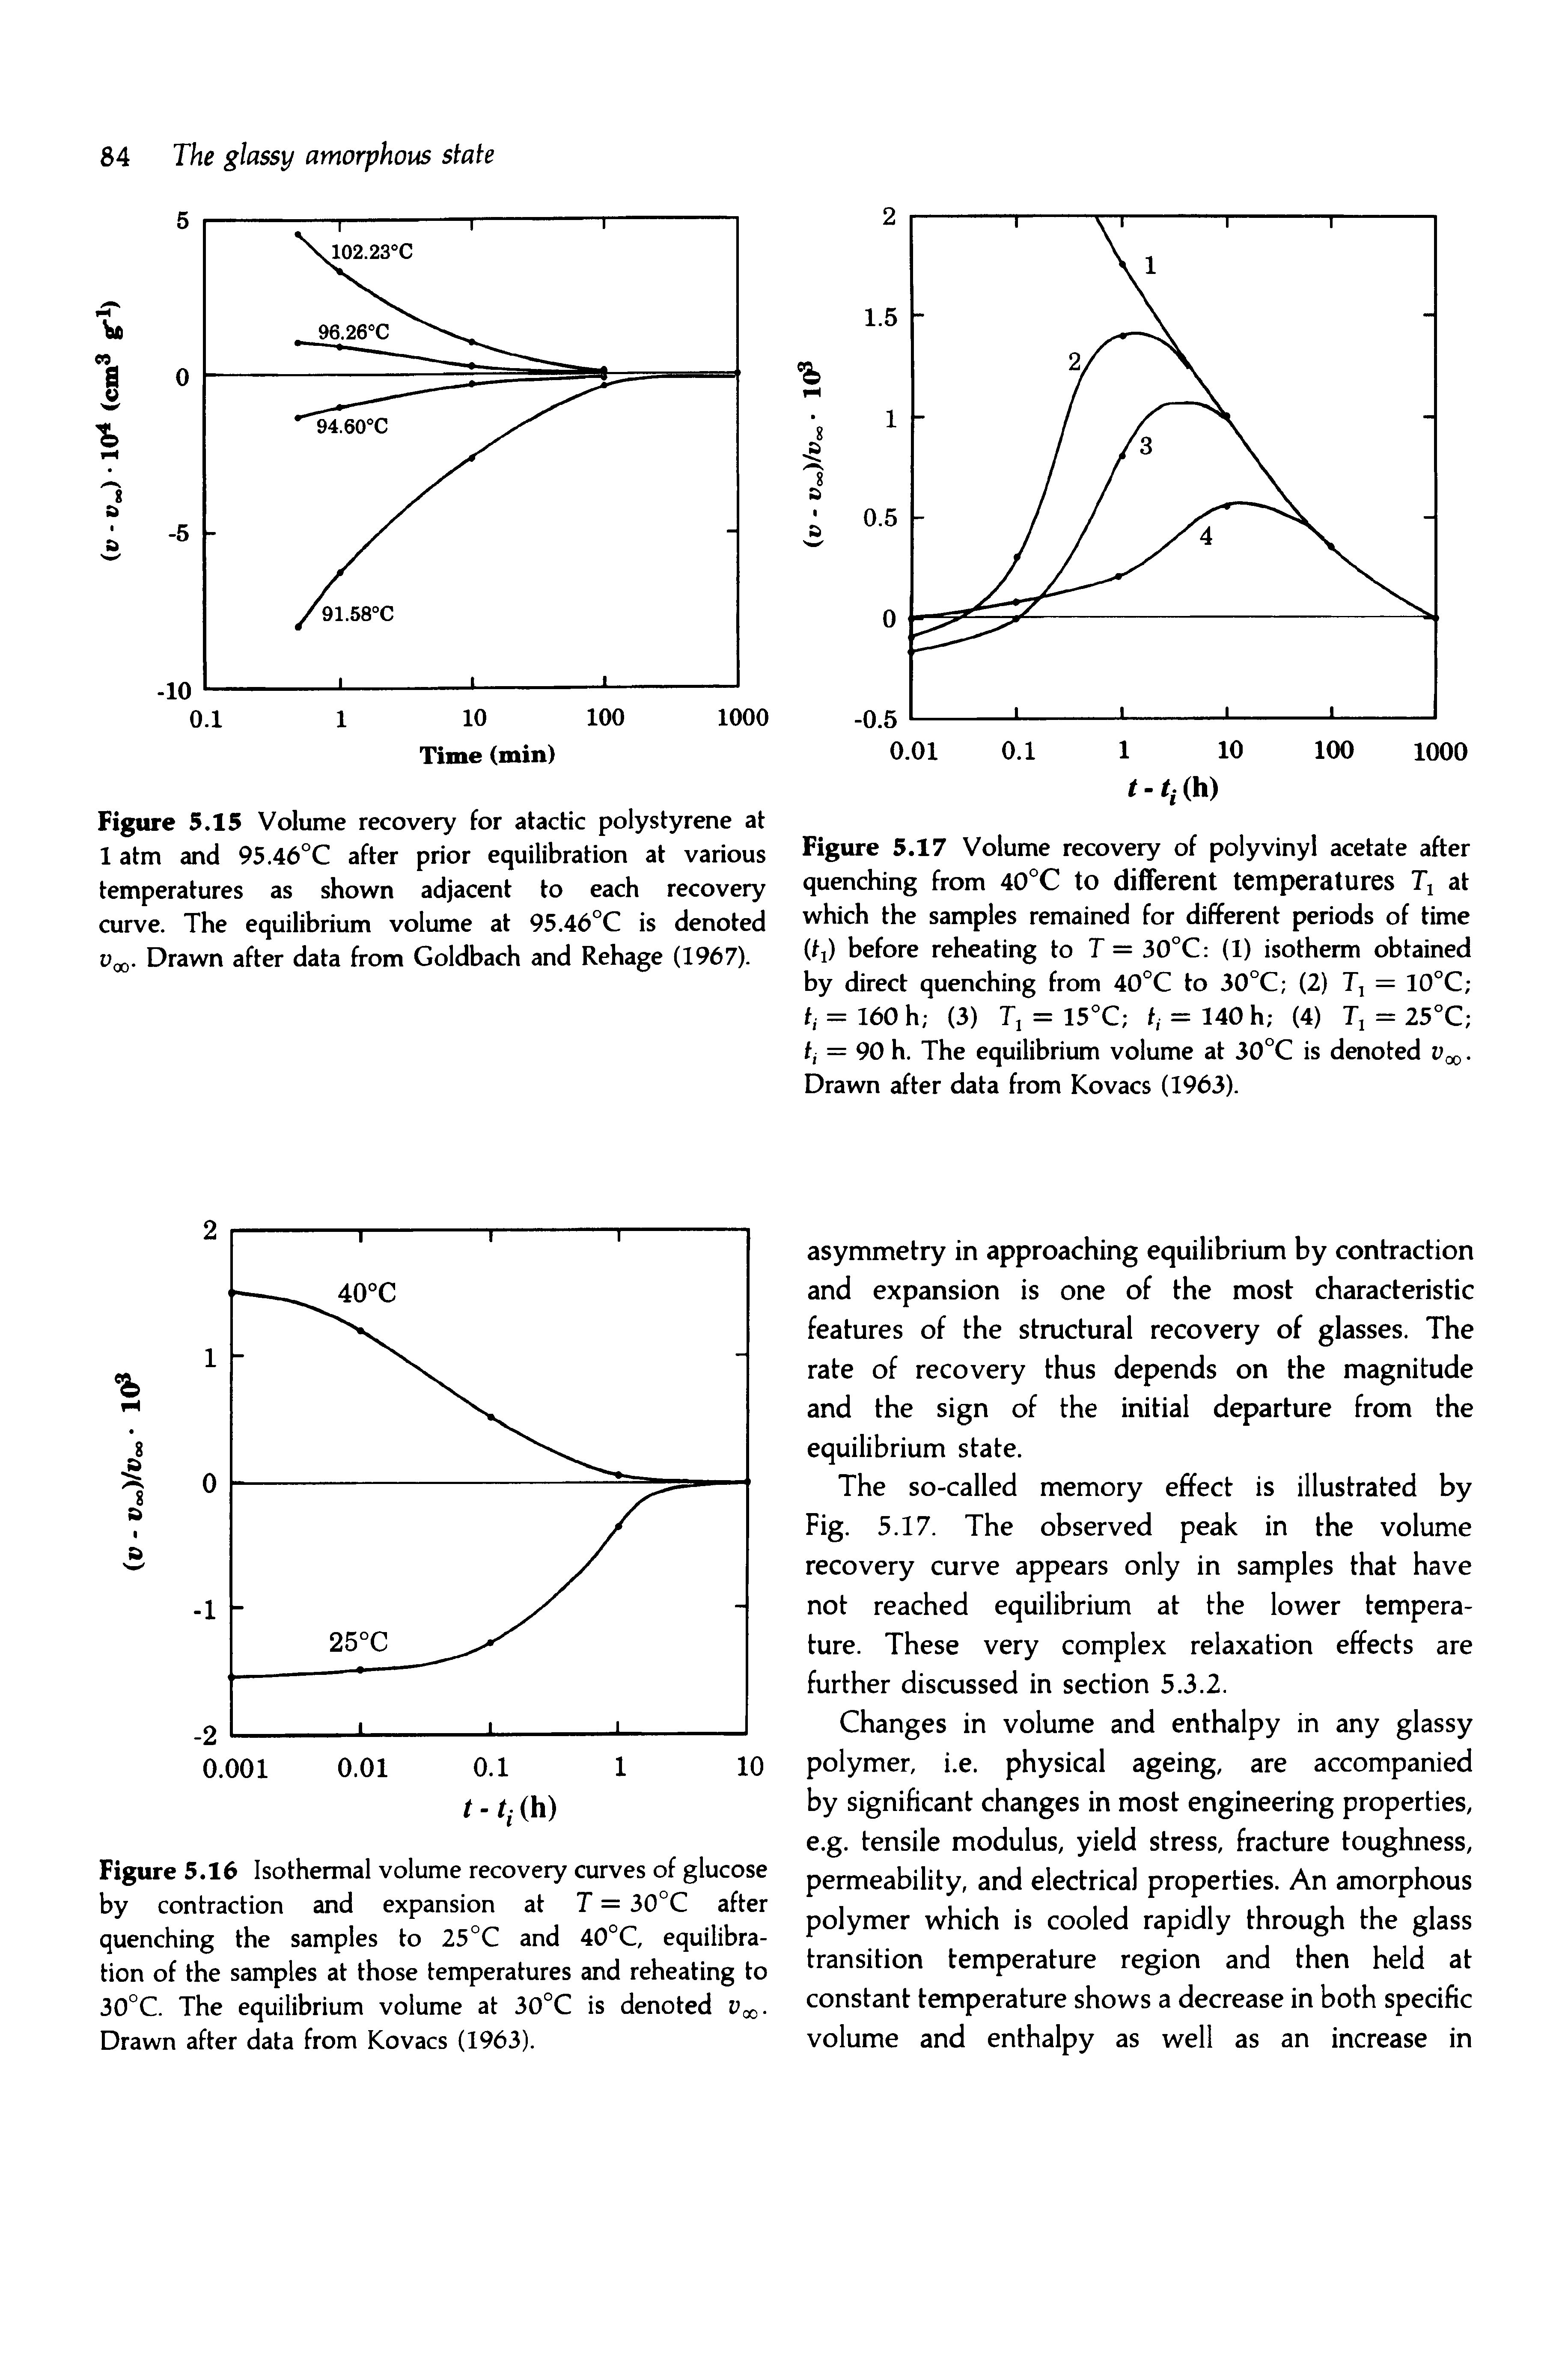 Figure 5.16 Isothermal volume recovery curves of glucose by contraction and expansion at T = 30°C after quenching the samples to 25 °C and 40°C, equilibration of the samples at those temperatures and reheating to 30°C. The equilibrium volume at 30°C is denoted Uqo. Drawn after data from Kovacs (1963).